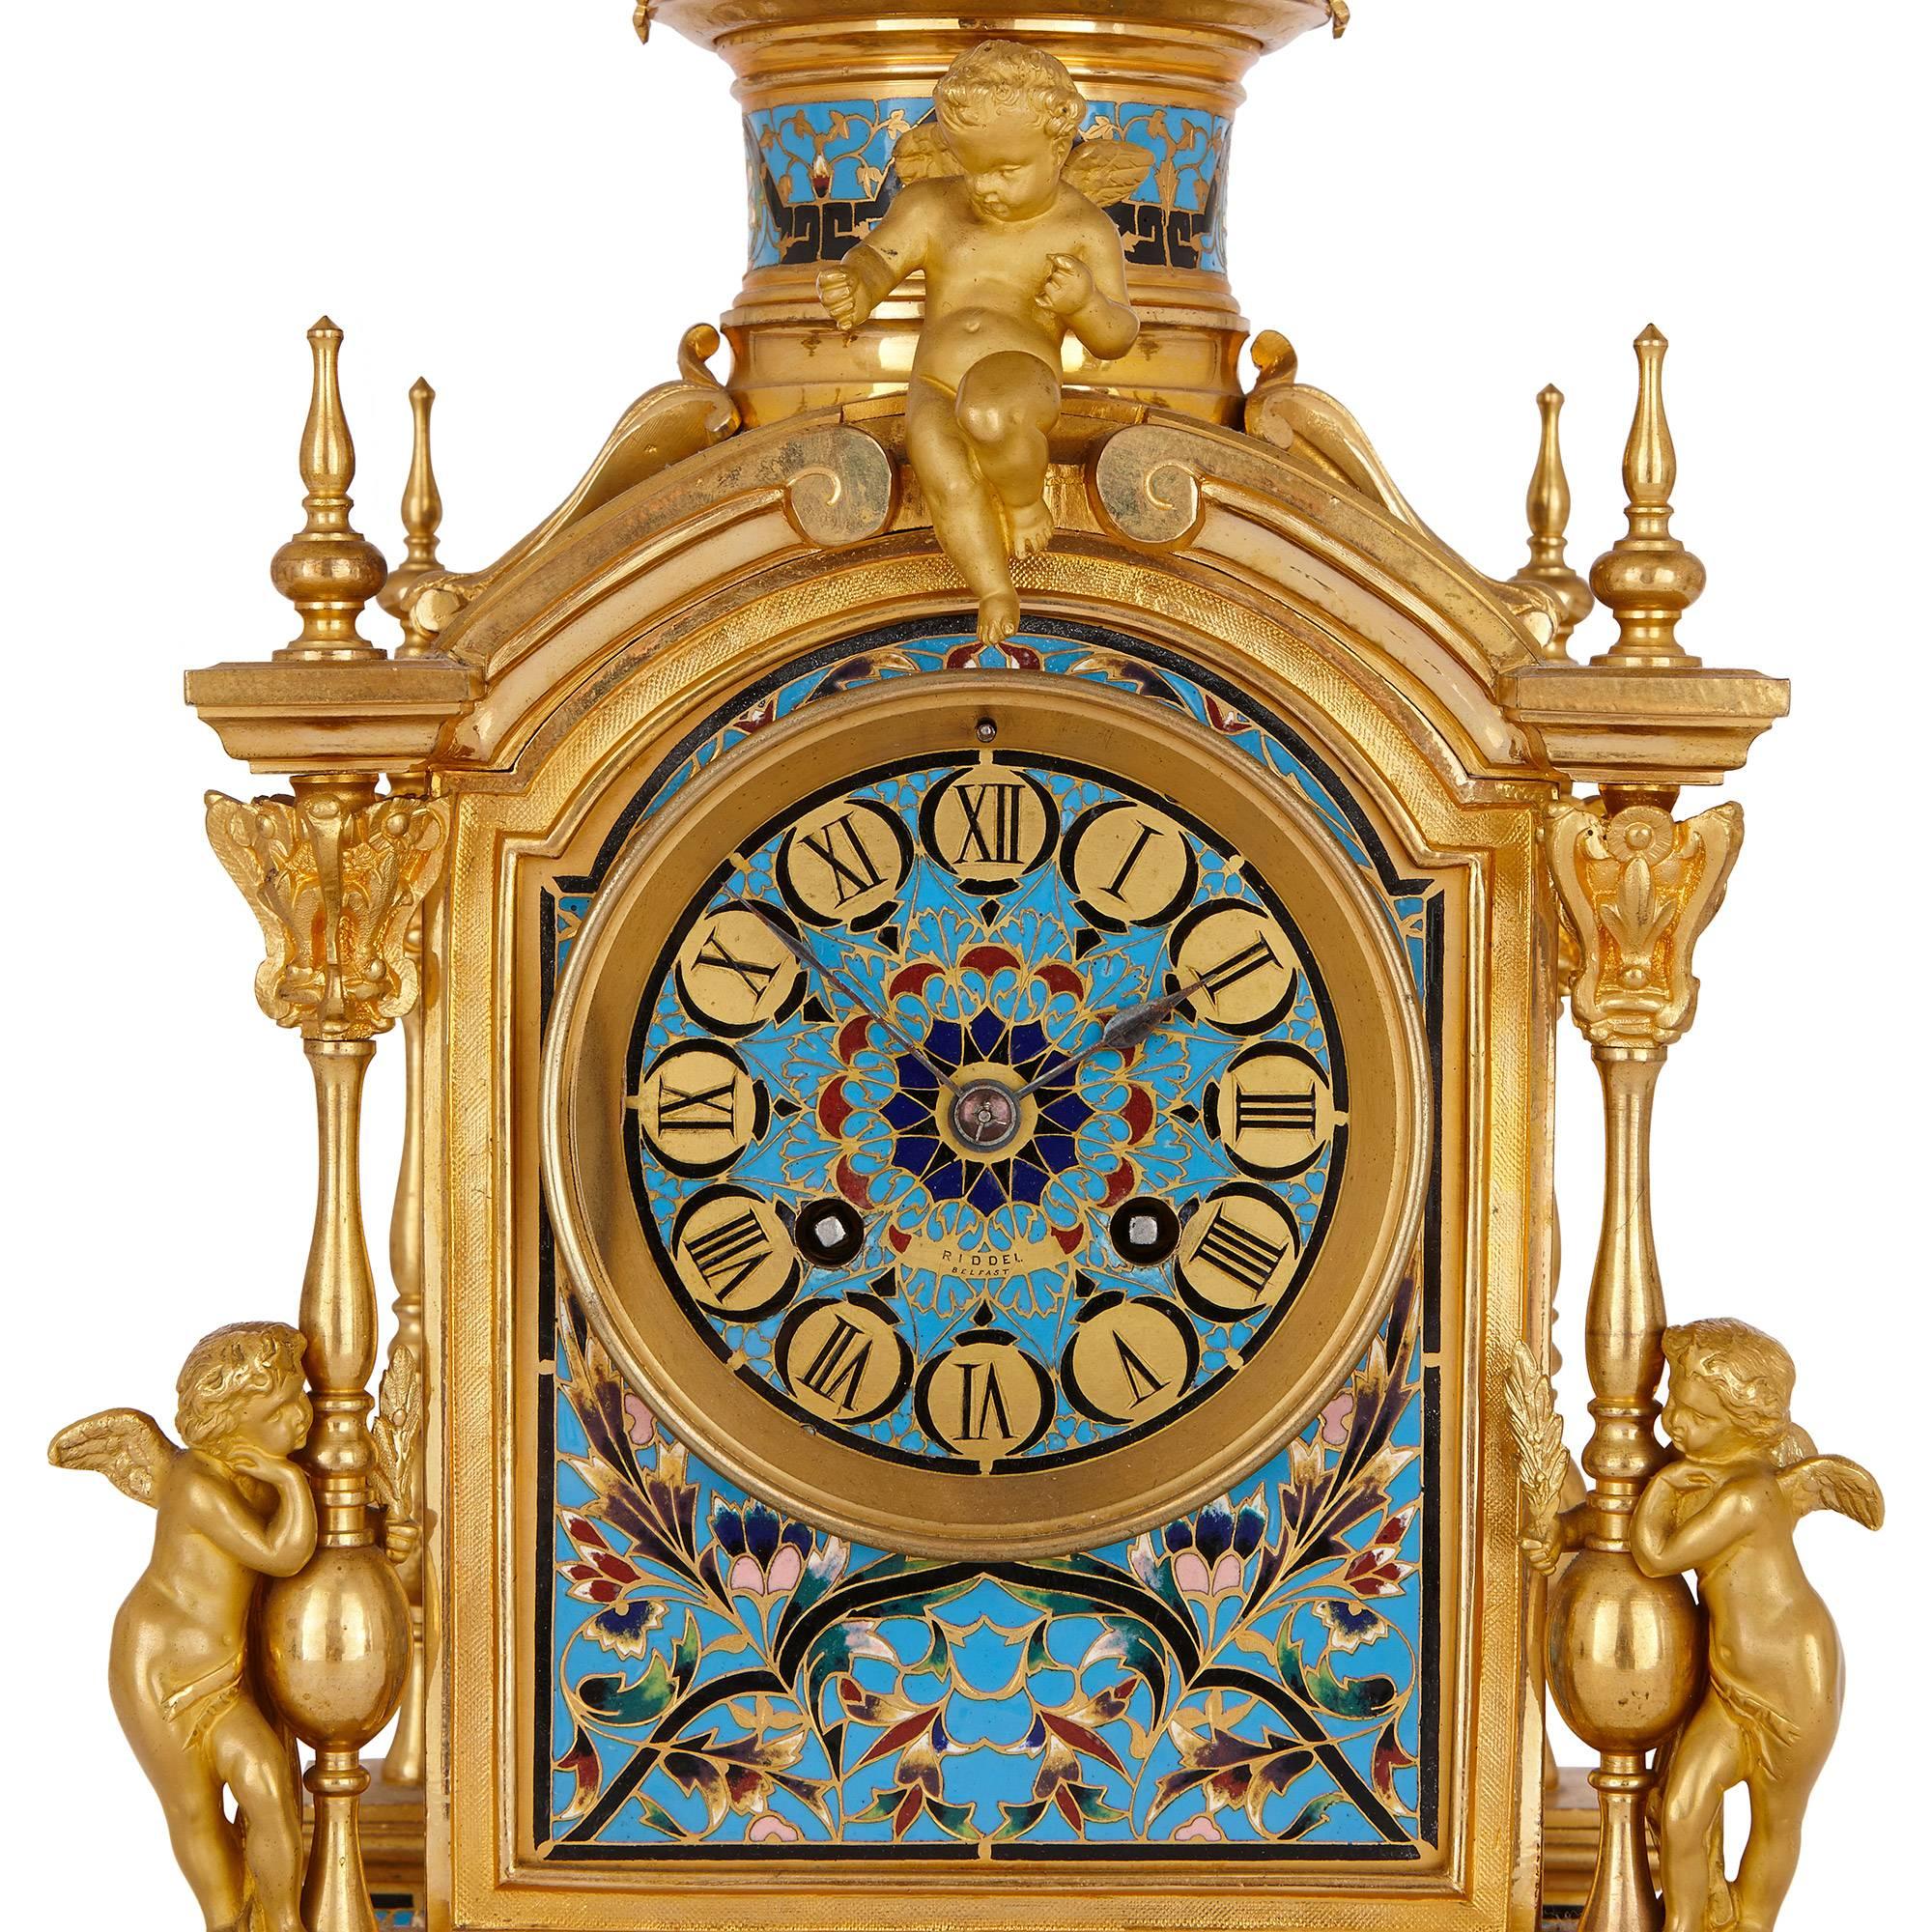 19th Century Antique French Neoclassical Style Ormolu and Cloisonne Enamel Clock Set For Sale